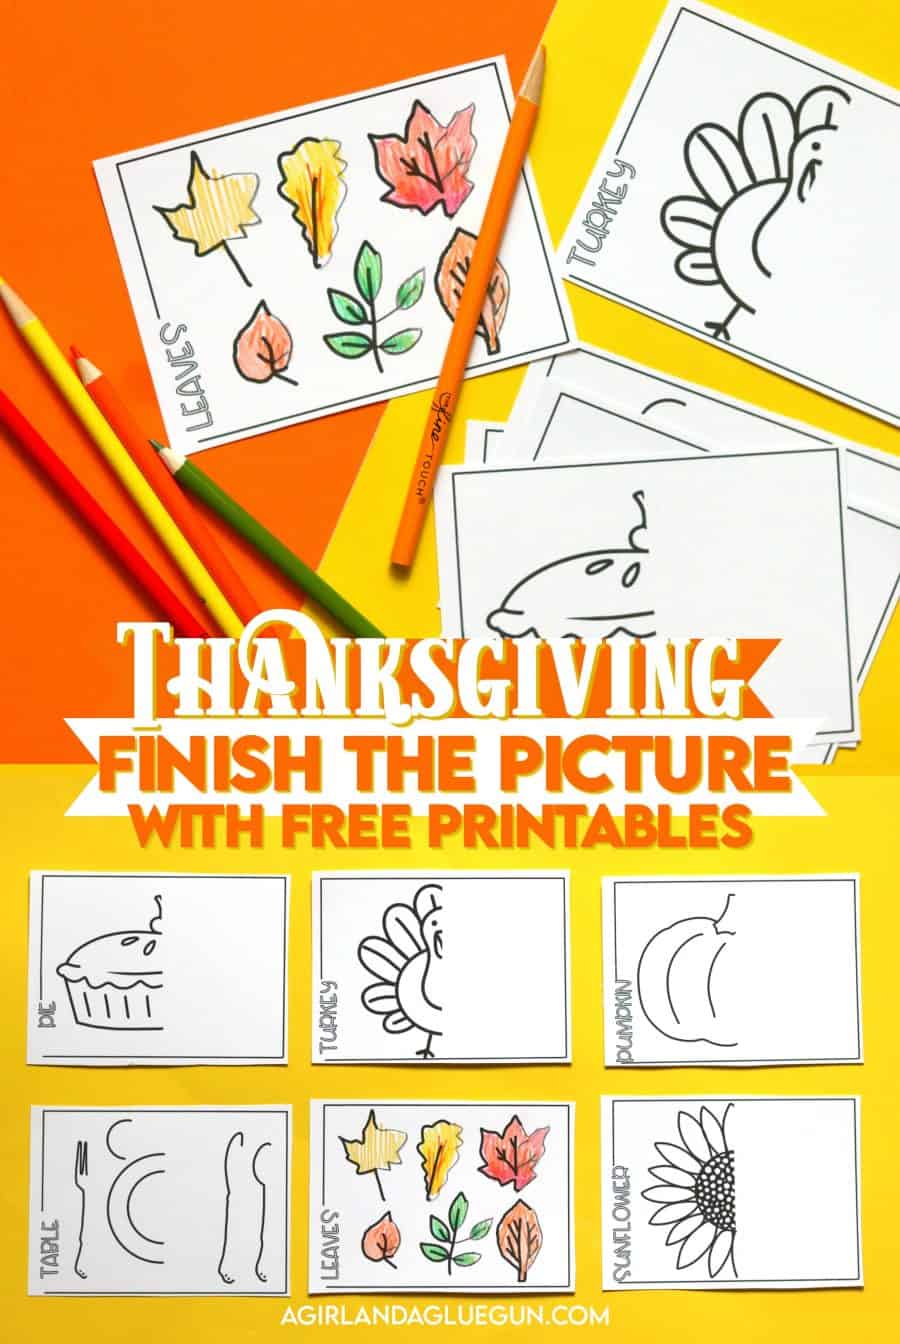 Thanksgiving finish the picture free printable A girl and a glue gun